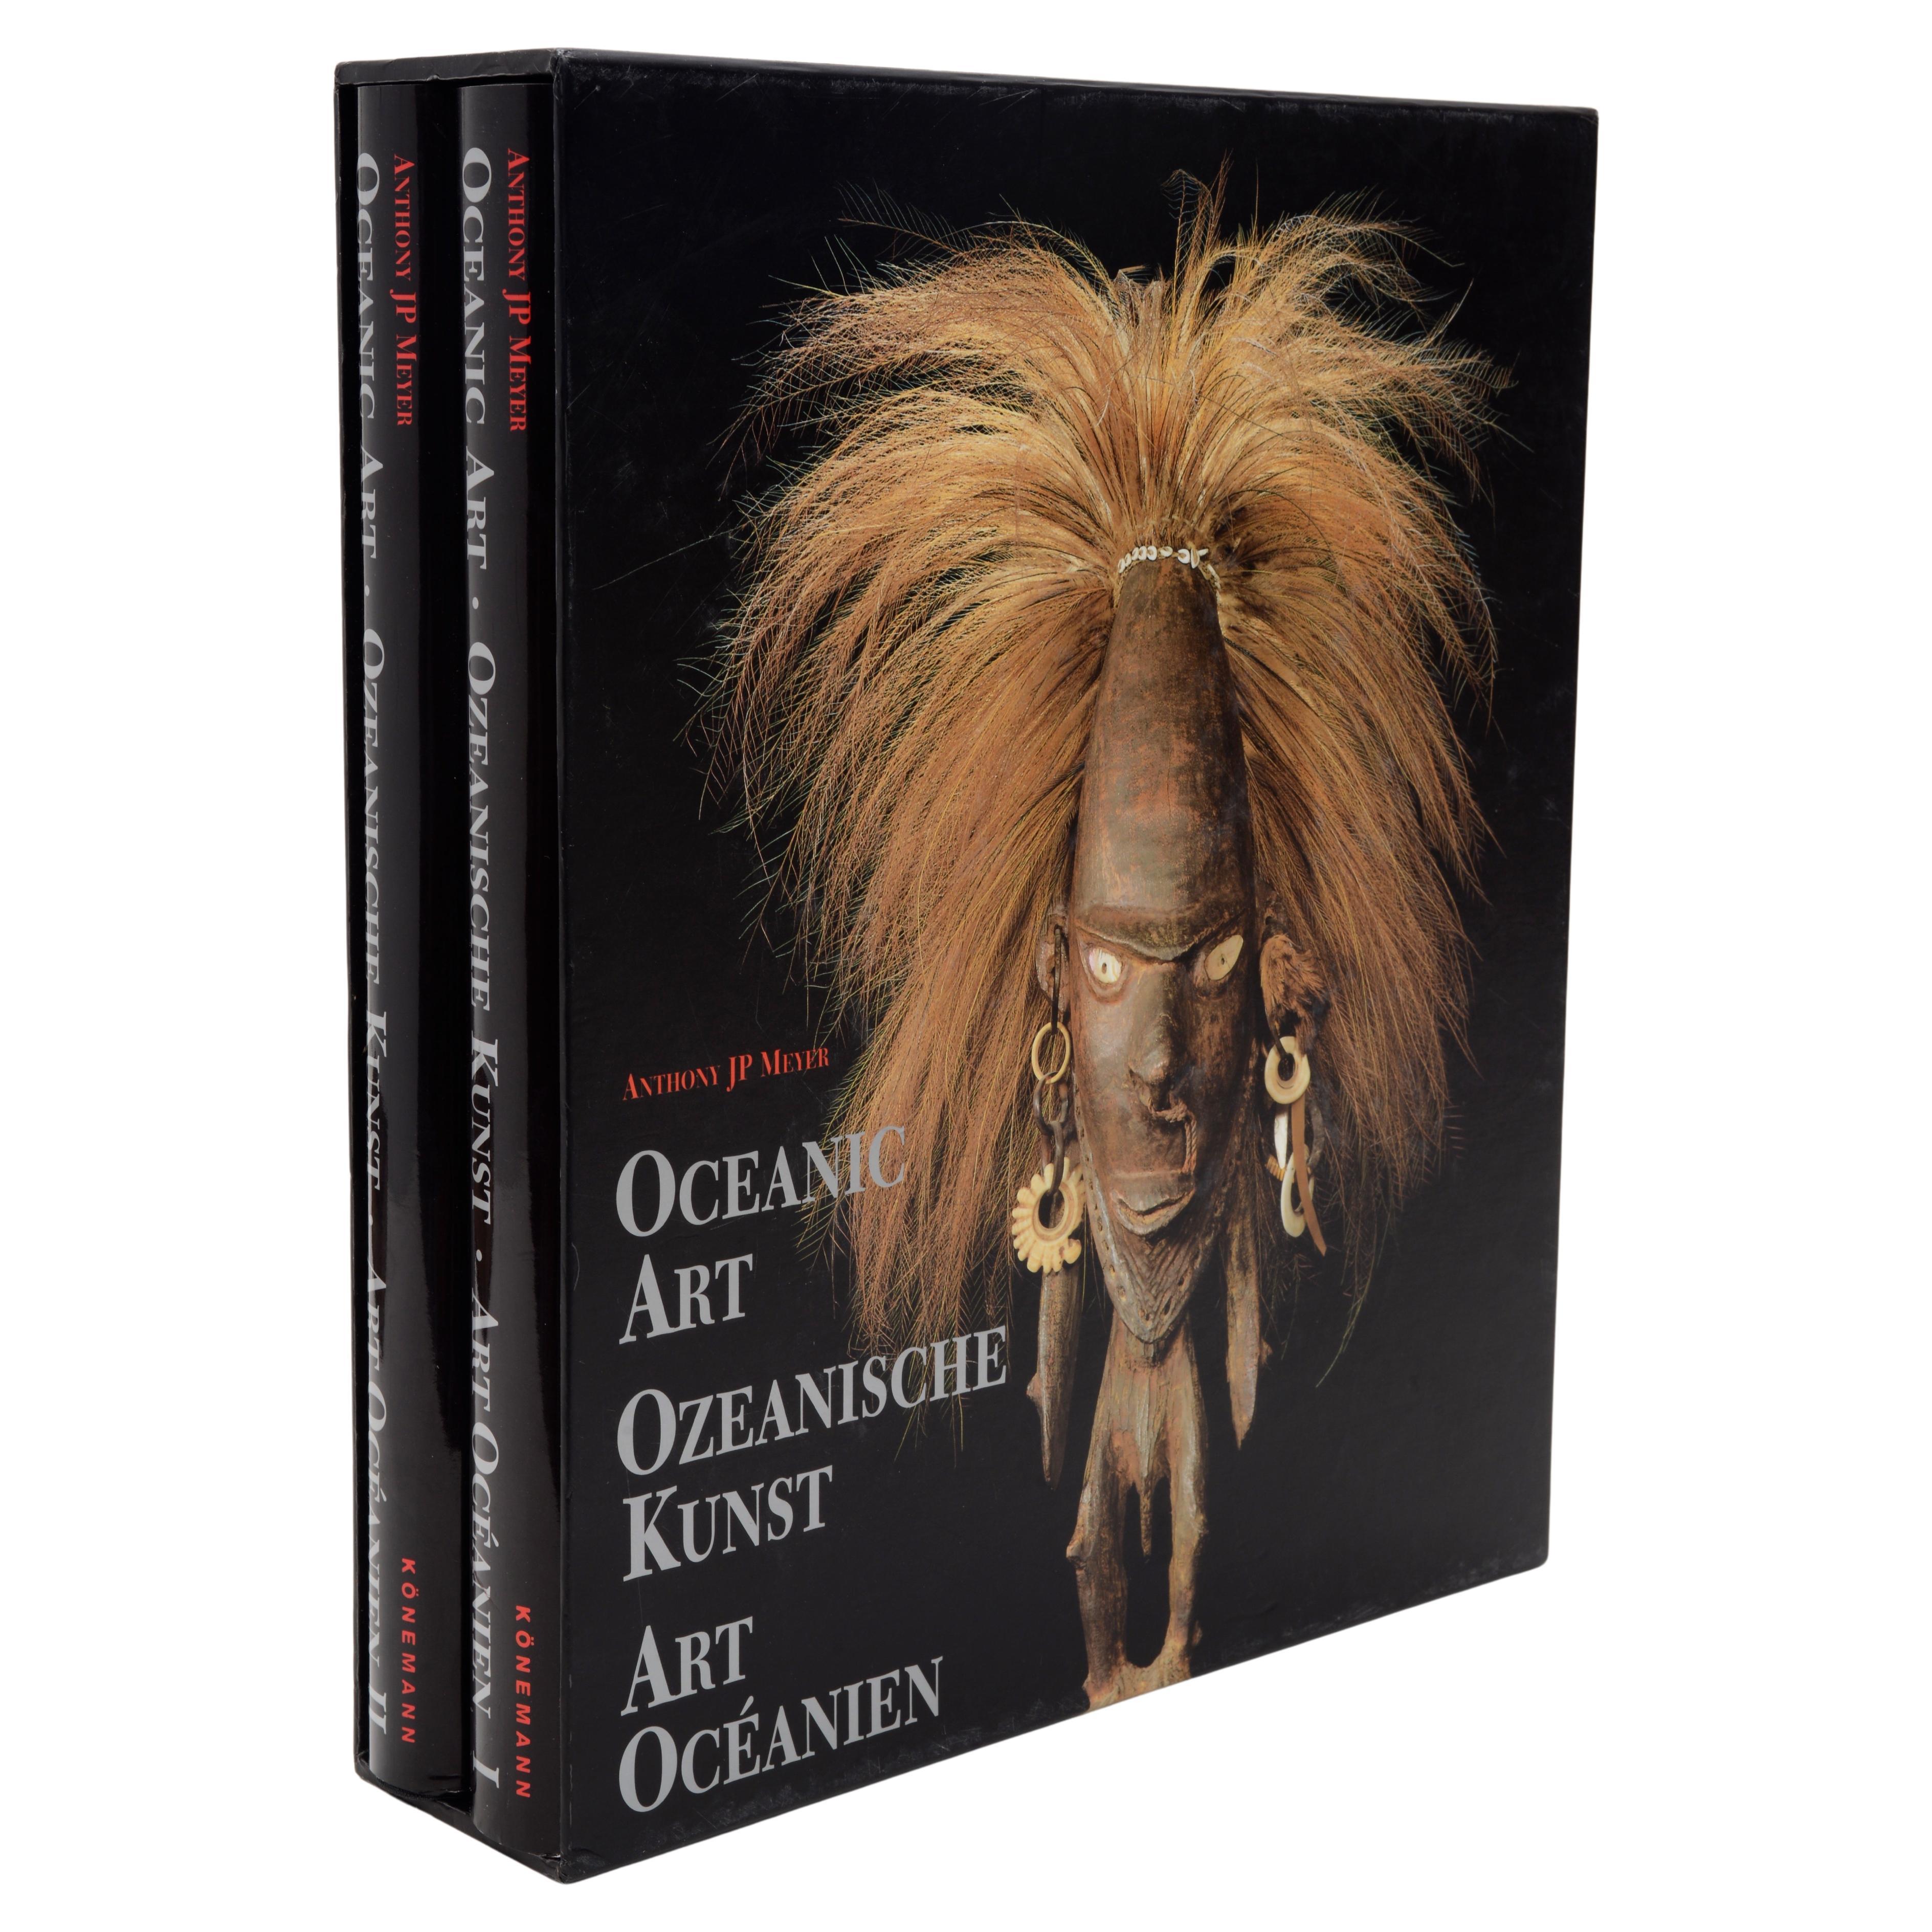 Oceanic Art, 2 Vol Set by Anthony J.P. Meyer, 1st Ed in English, French & German For Sale